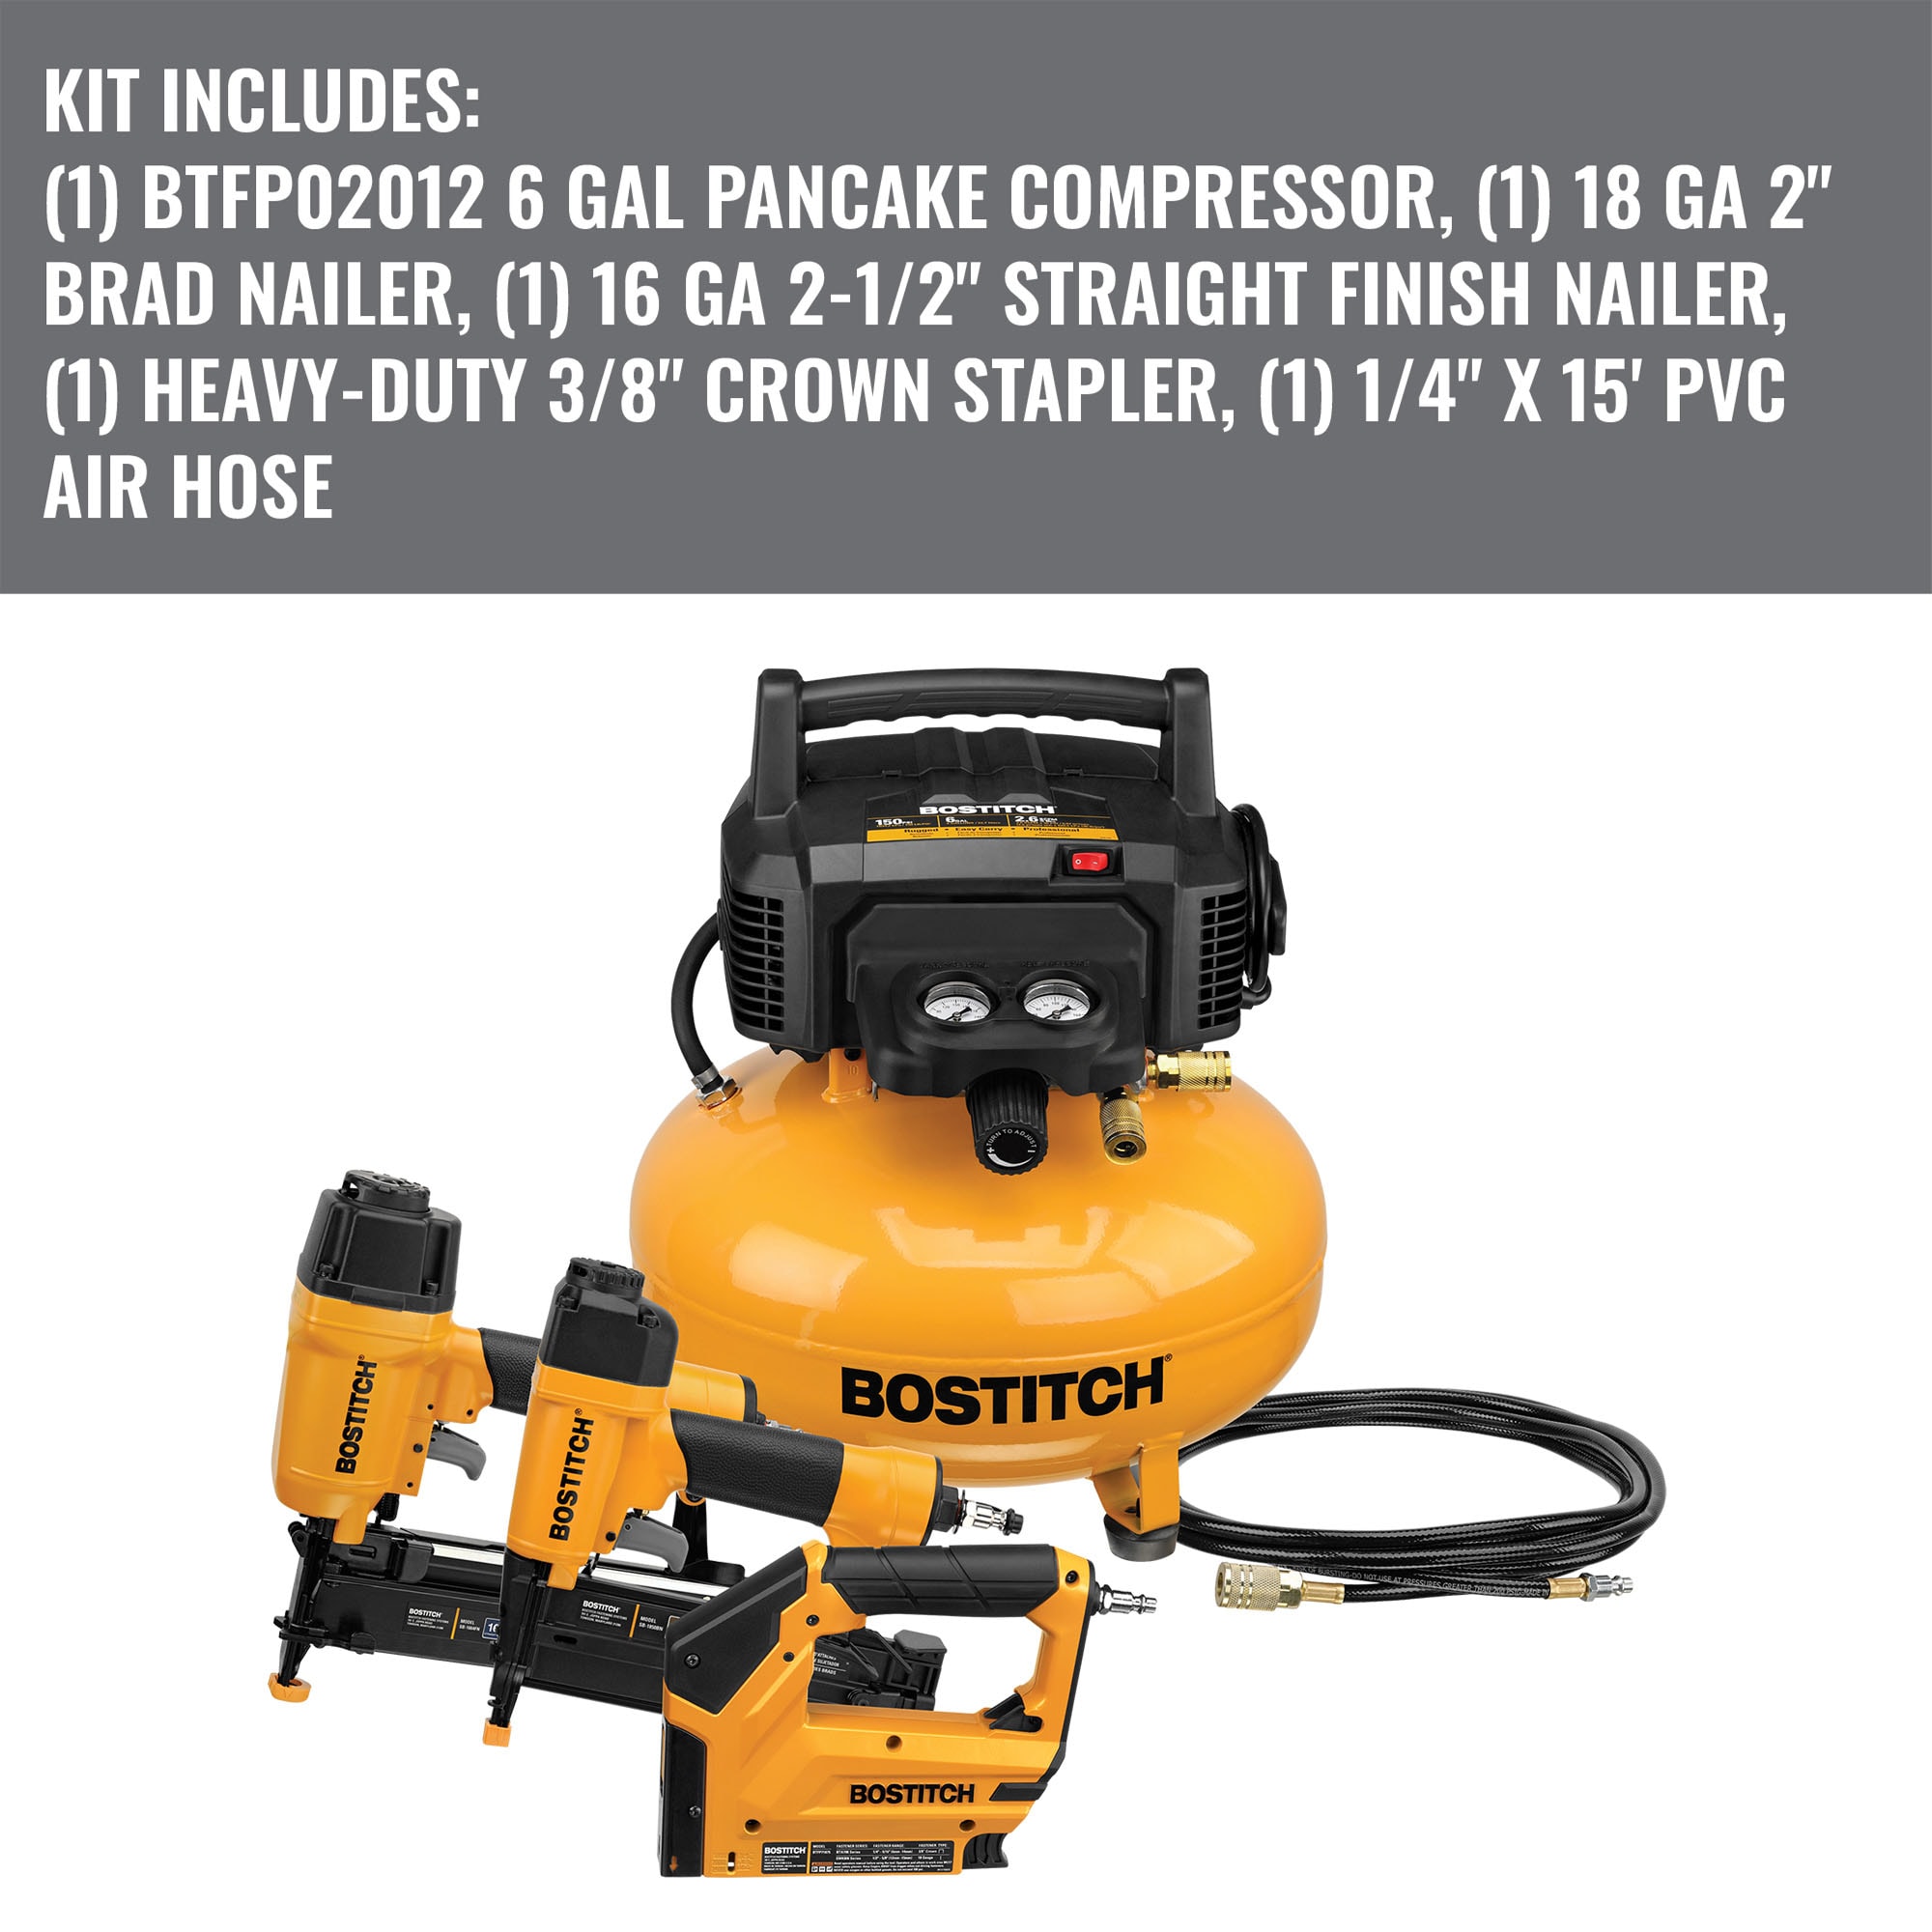 Bostitch 6-Gallons Portable 150 PSI Pancake Air Compressor in the